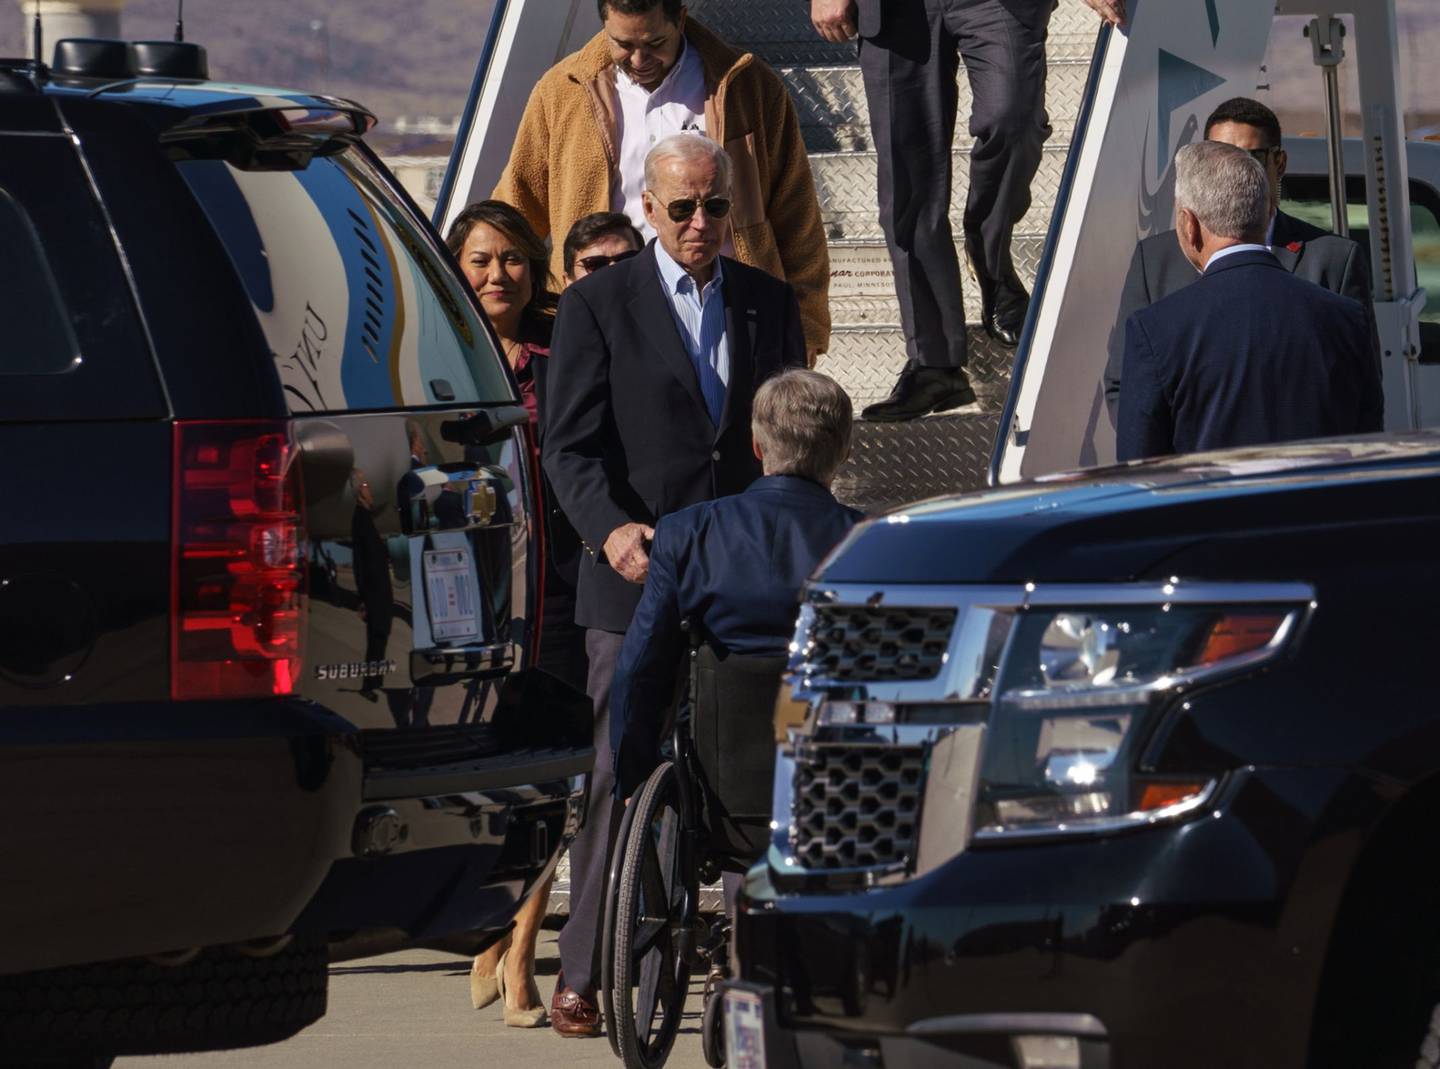 US President Joe Biden center, greets Greg Abbott, governor of Texas, at El Paso International Airport in El Paso, Texas, US, on Sunday, Jan. 8, 2023. Biden will see first-hand conditions for migrants and the US officials who process them as they cross from Mexico during his first presidential visit to the US and Mexico border. Photographer: Paul Ratje/Bloombergdfd